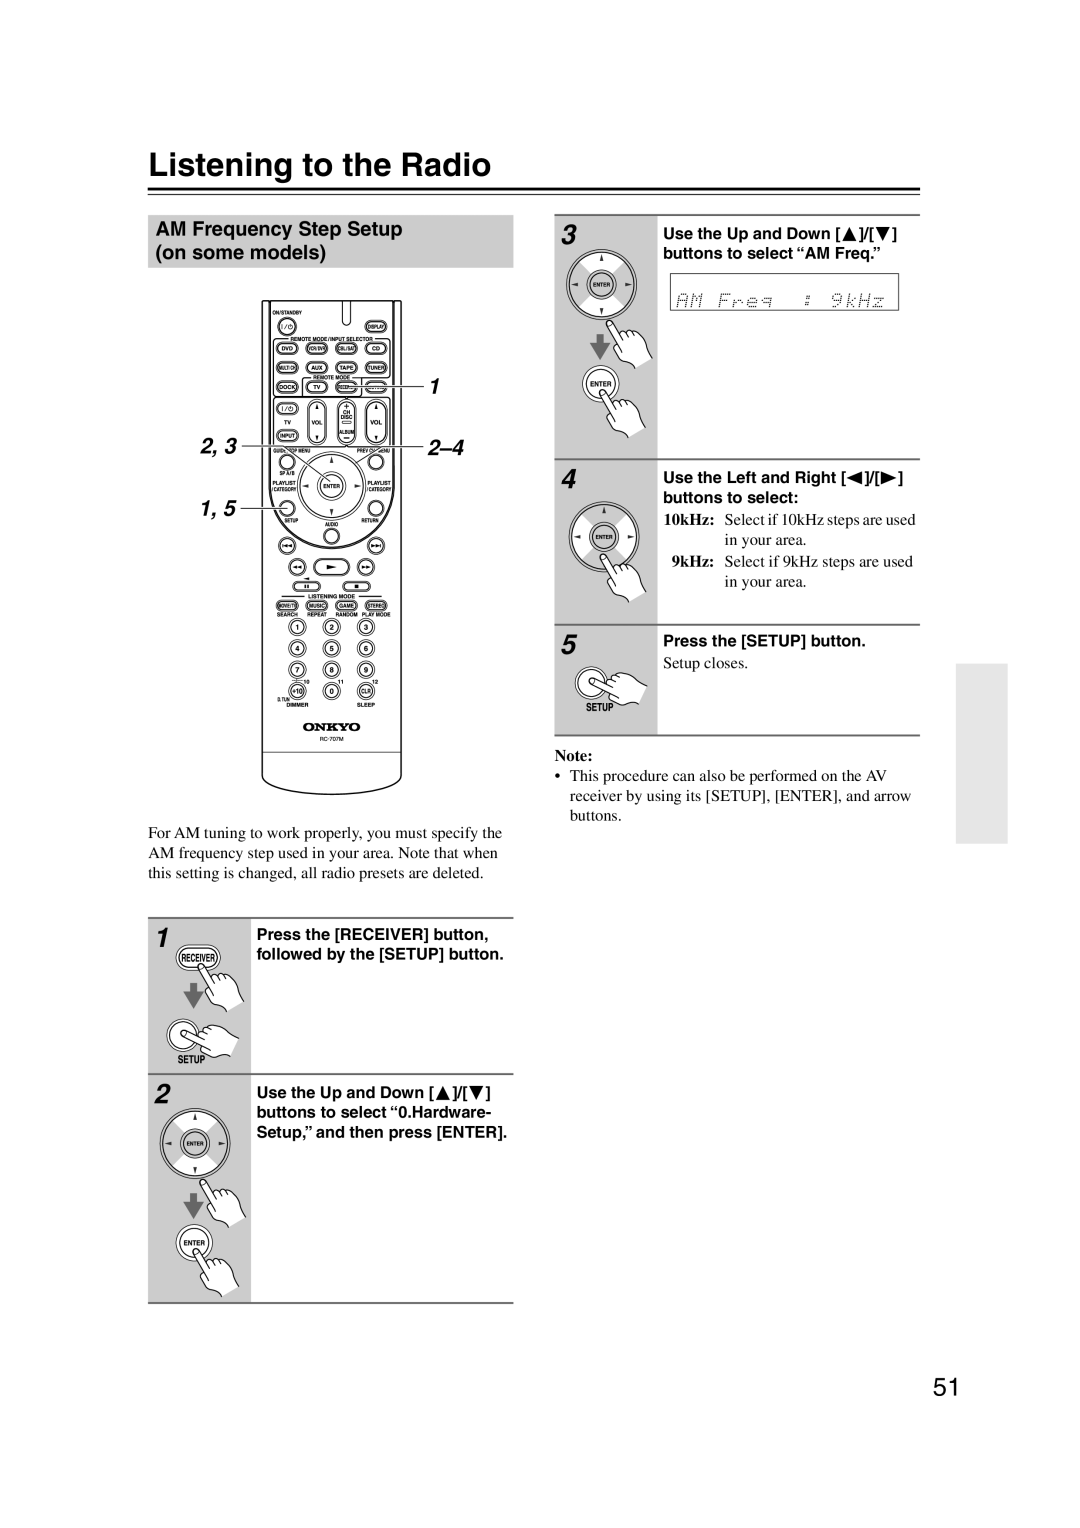 Onkyo HT-S5100 instruction manual Listening to the Radio, 1 2, 32–4 1, AM Frequency Step Setup on some models, Setup closes 